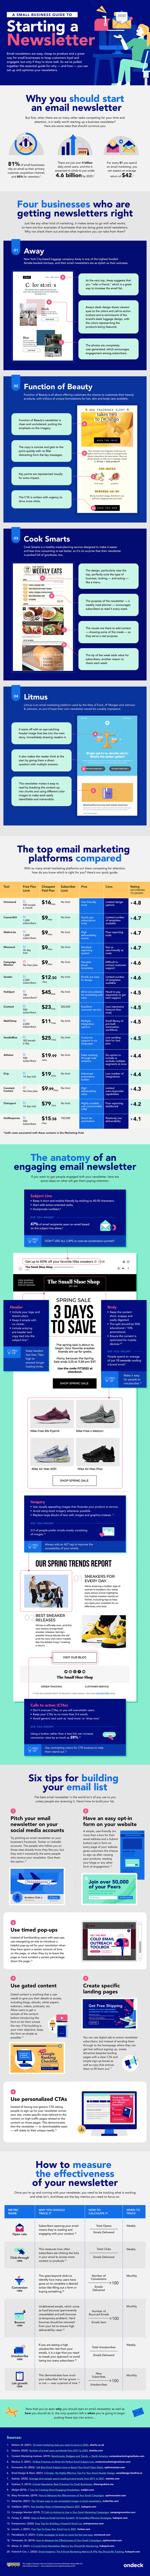 Starting a Newsletter infographic